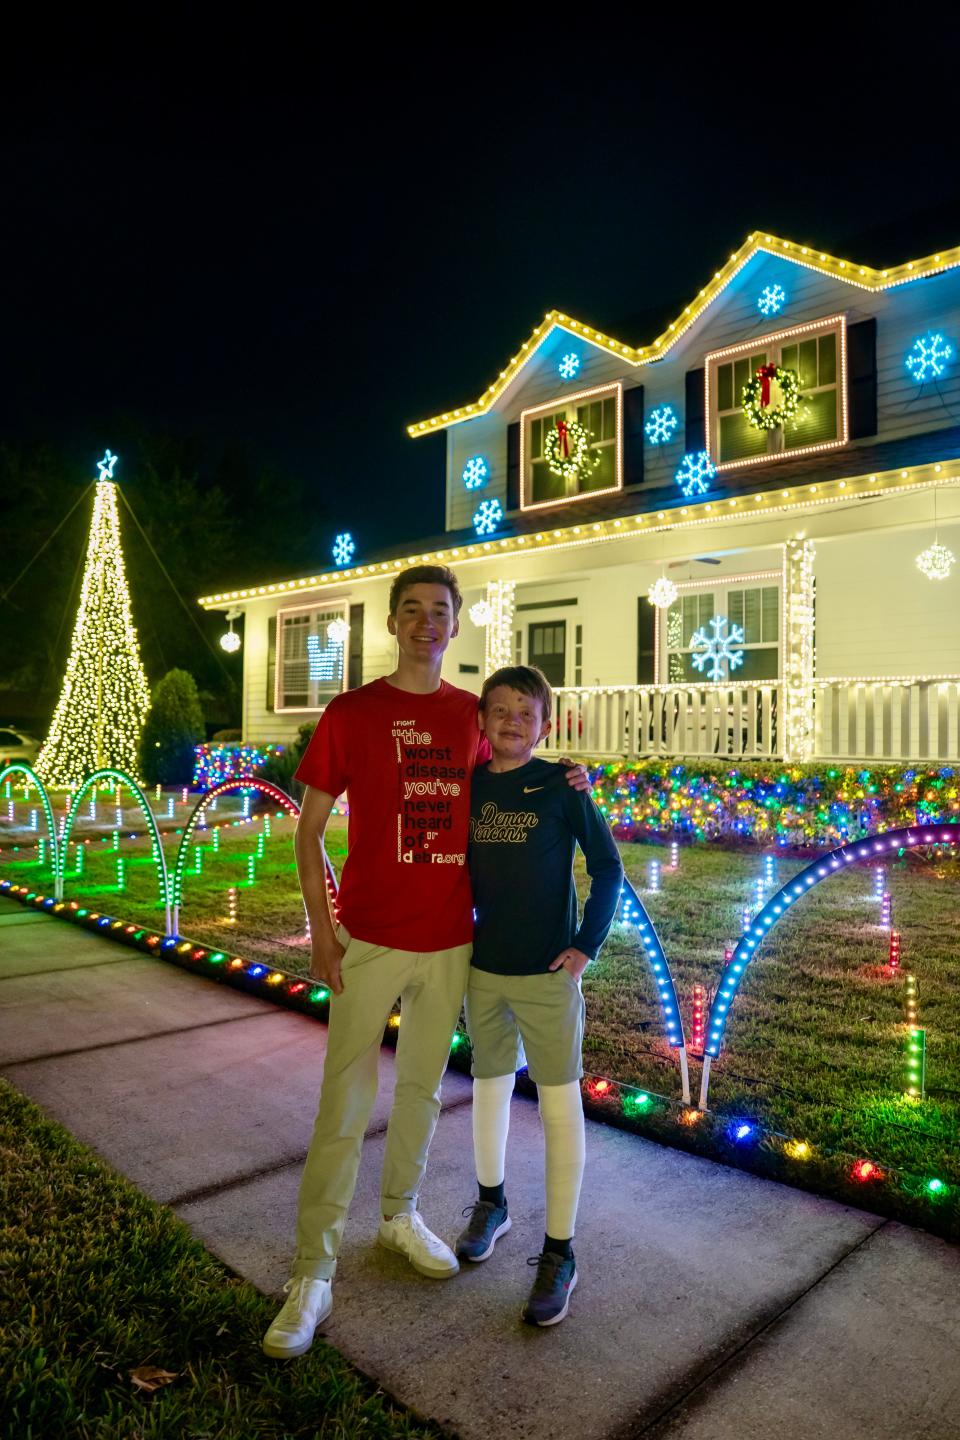 Jonah Williams, right, visited Jacksonville from his home in North Carolina to see the holiday light display created by his cousin, Jack Wheeler, left. Williams suffers from epidermolysis bullosa, a genetic skin condition. Wheeler's display has raised tens of thousands of dollars to fight the disease.